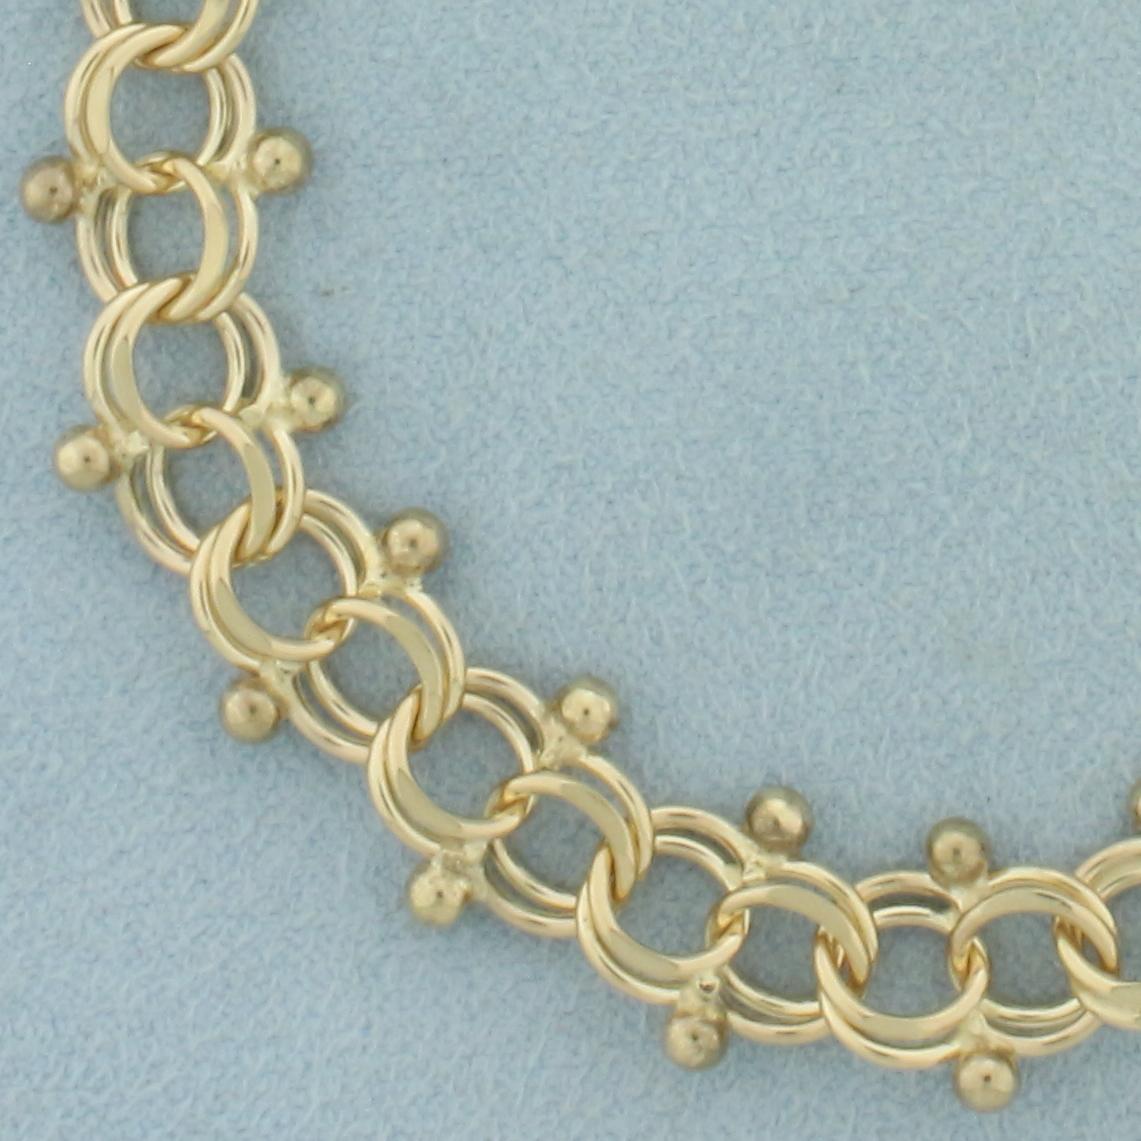 Double Loop And Bead Charm Bracelet In 14k Yellow Gold